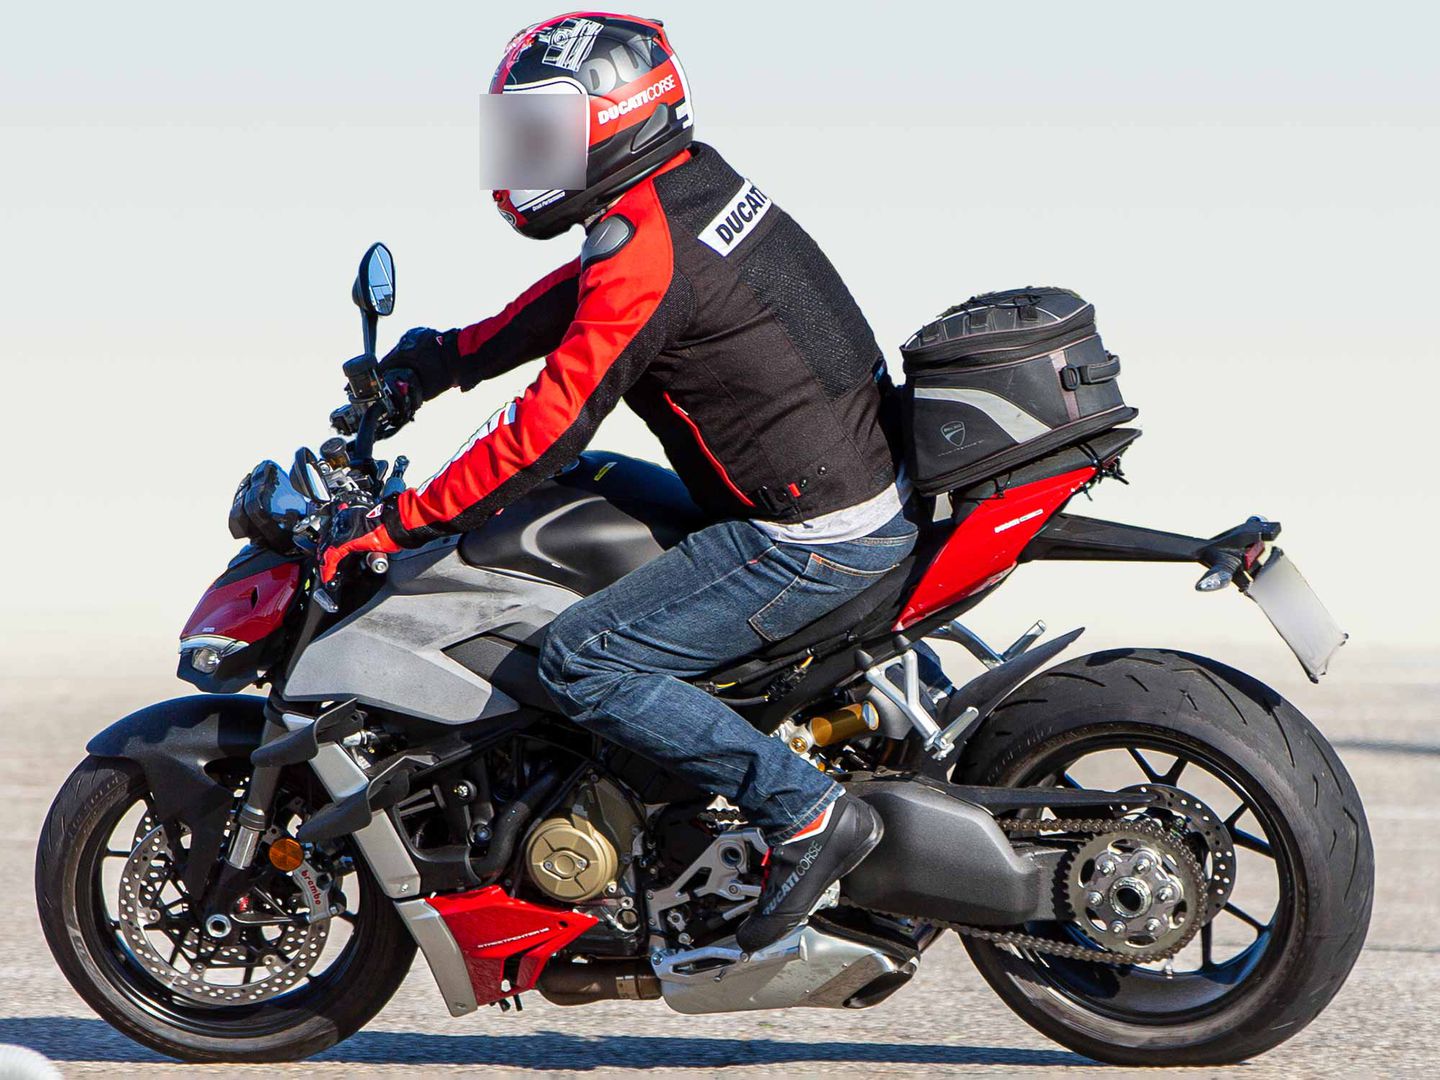 [Street] The 2023 Ducati Streetfighter is already being tested